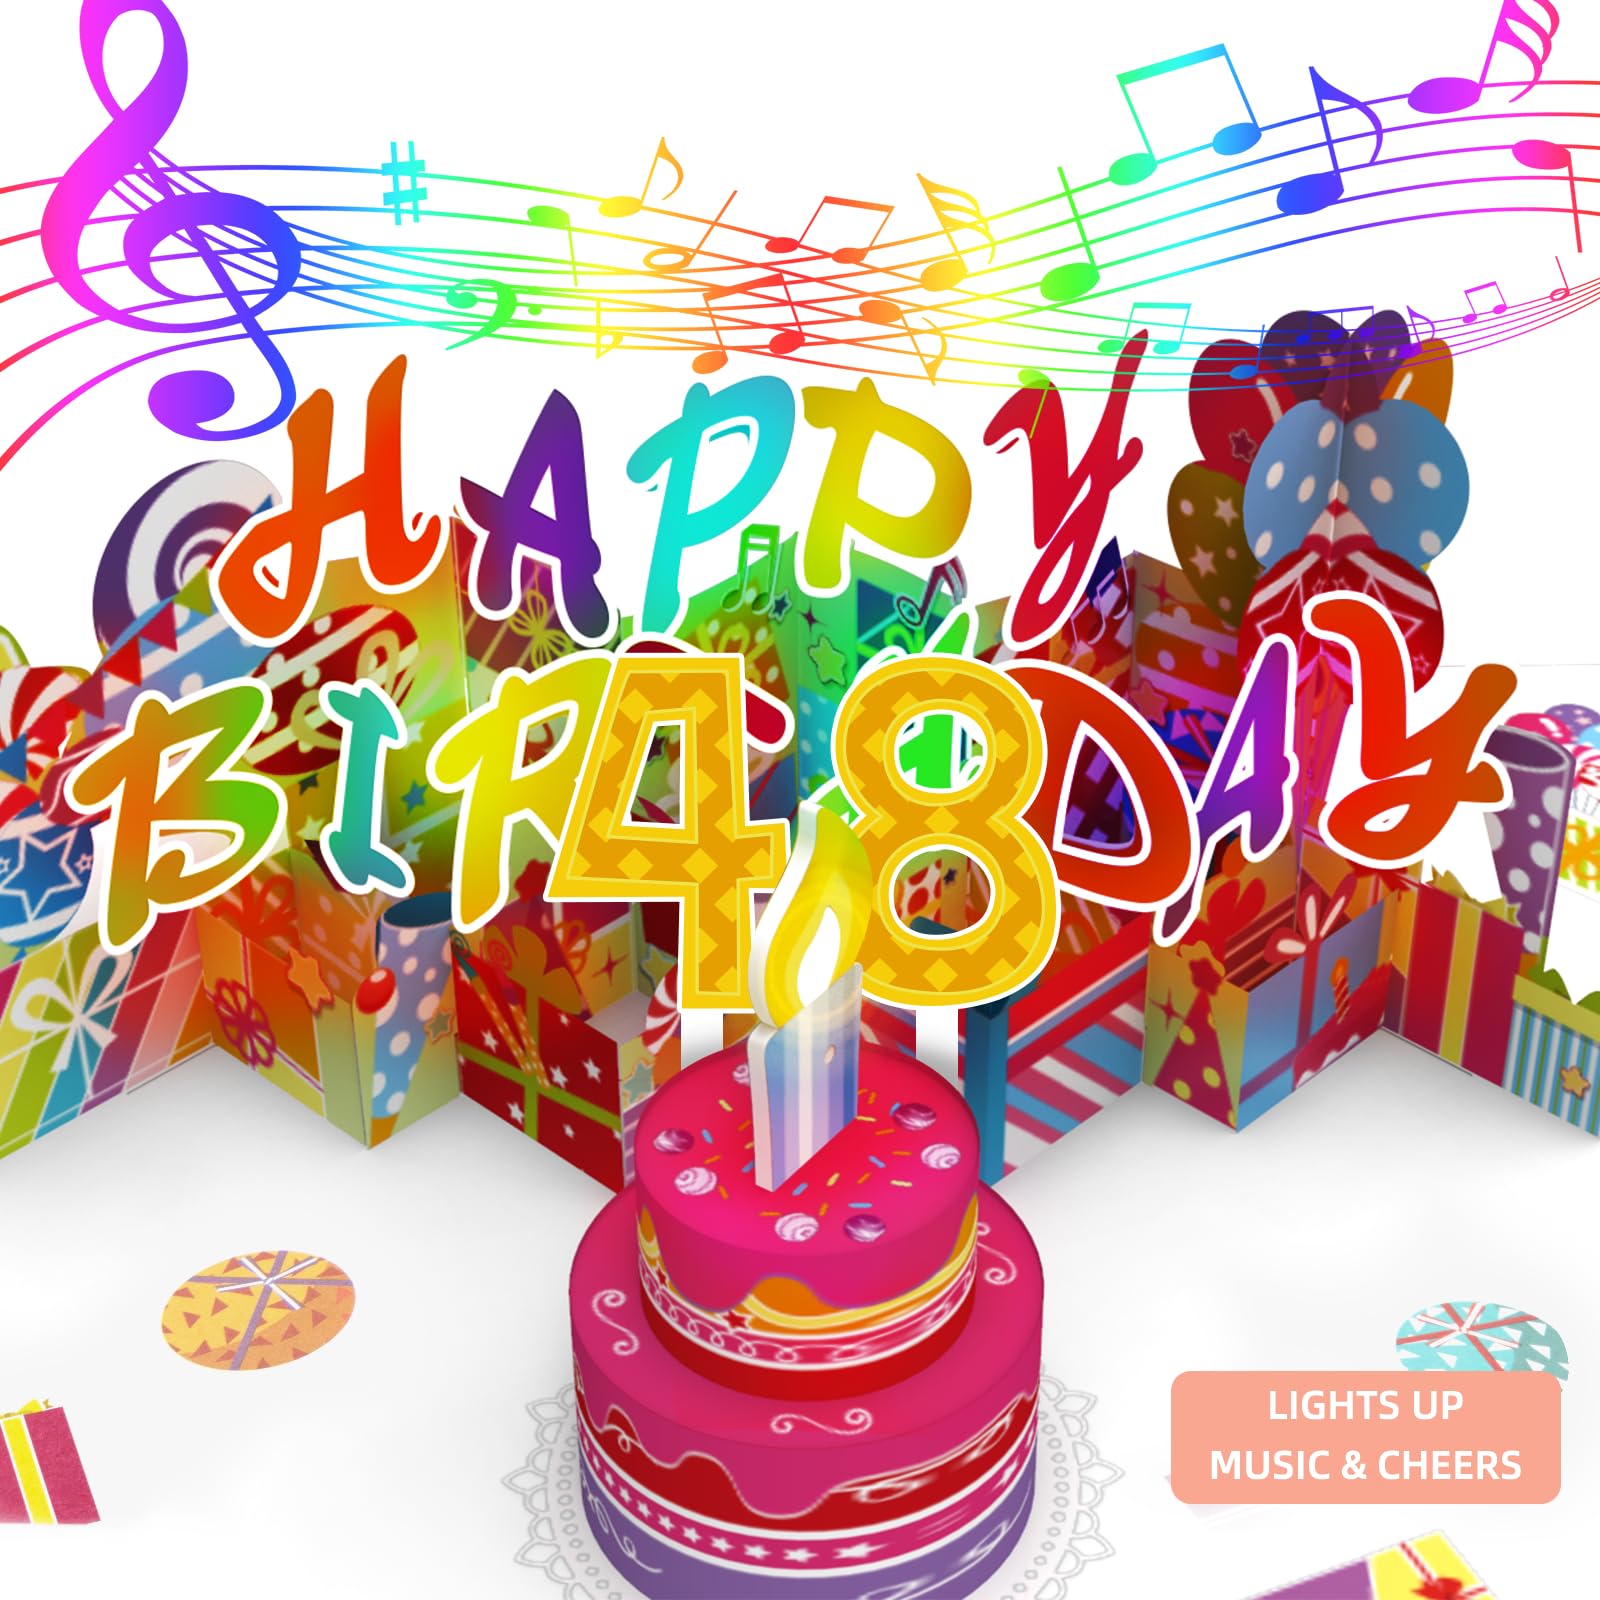 Gumry 48TH Musical Birthday PopUp Card, Blowable LED Light Candle 3D Cards with Song 'HAPPY', Applause Cheers Sound,Color-Changi